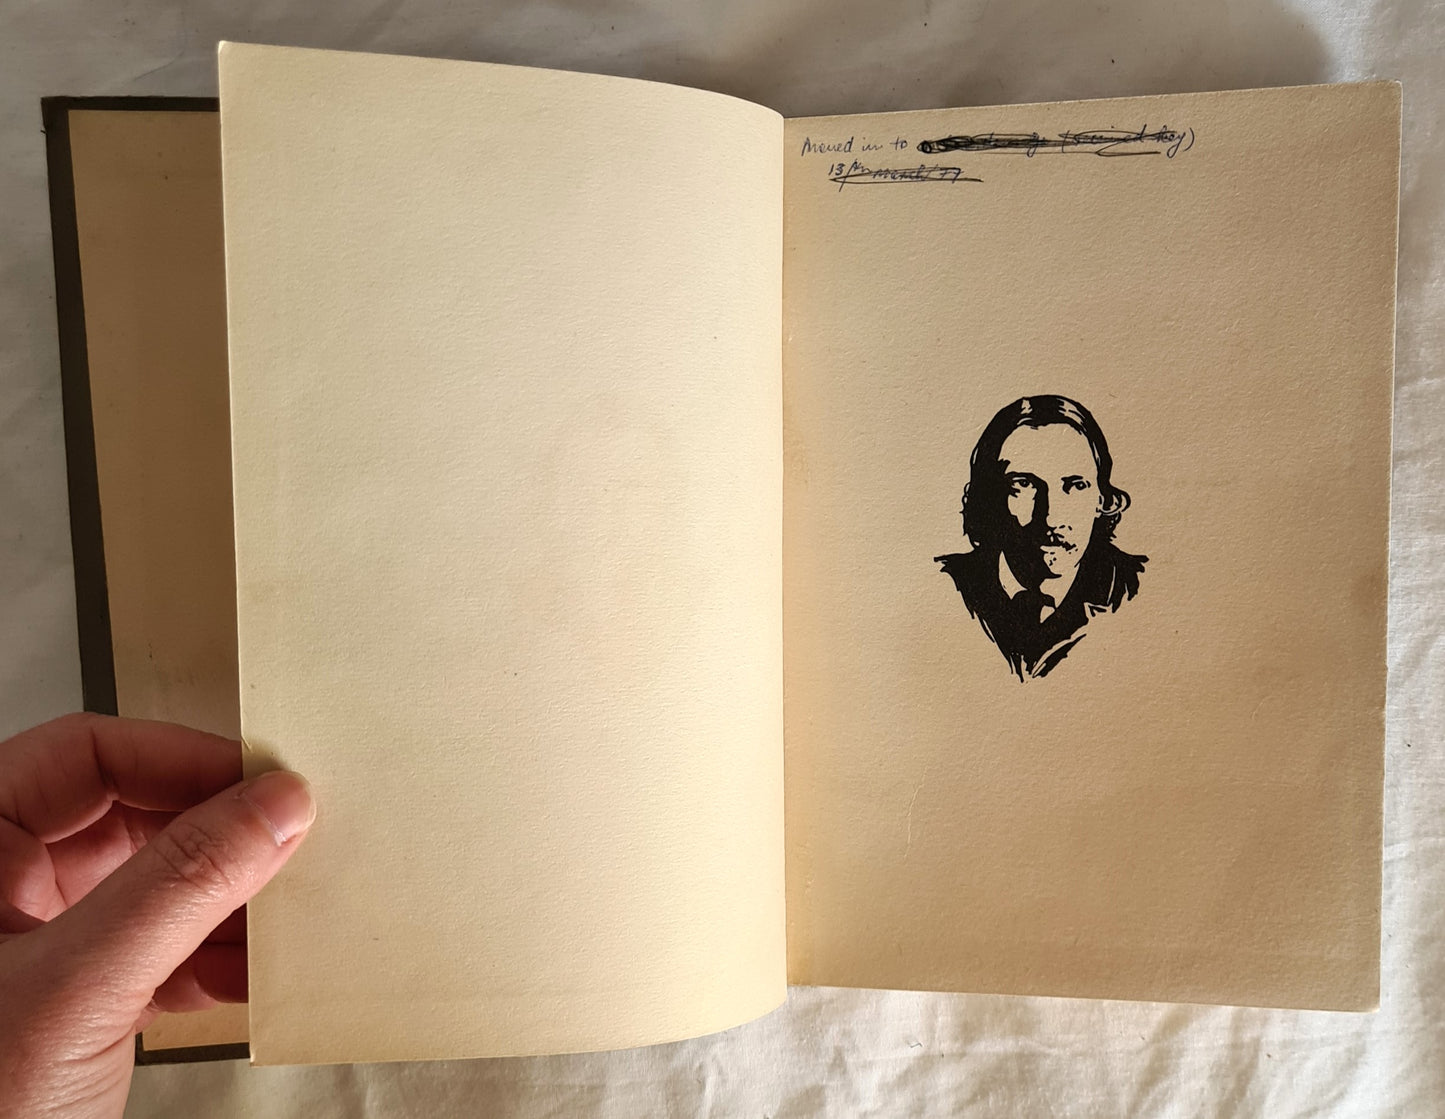 A Day With Robert Louis Stevenson by Maurice Clare